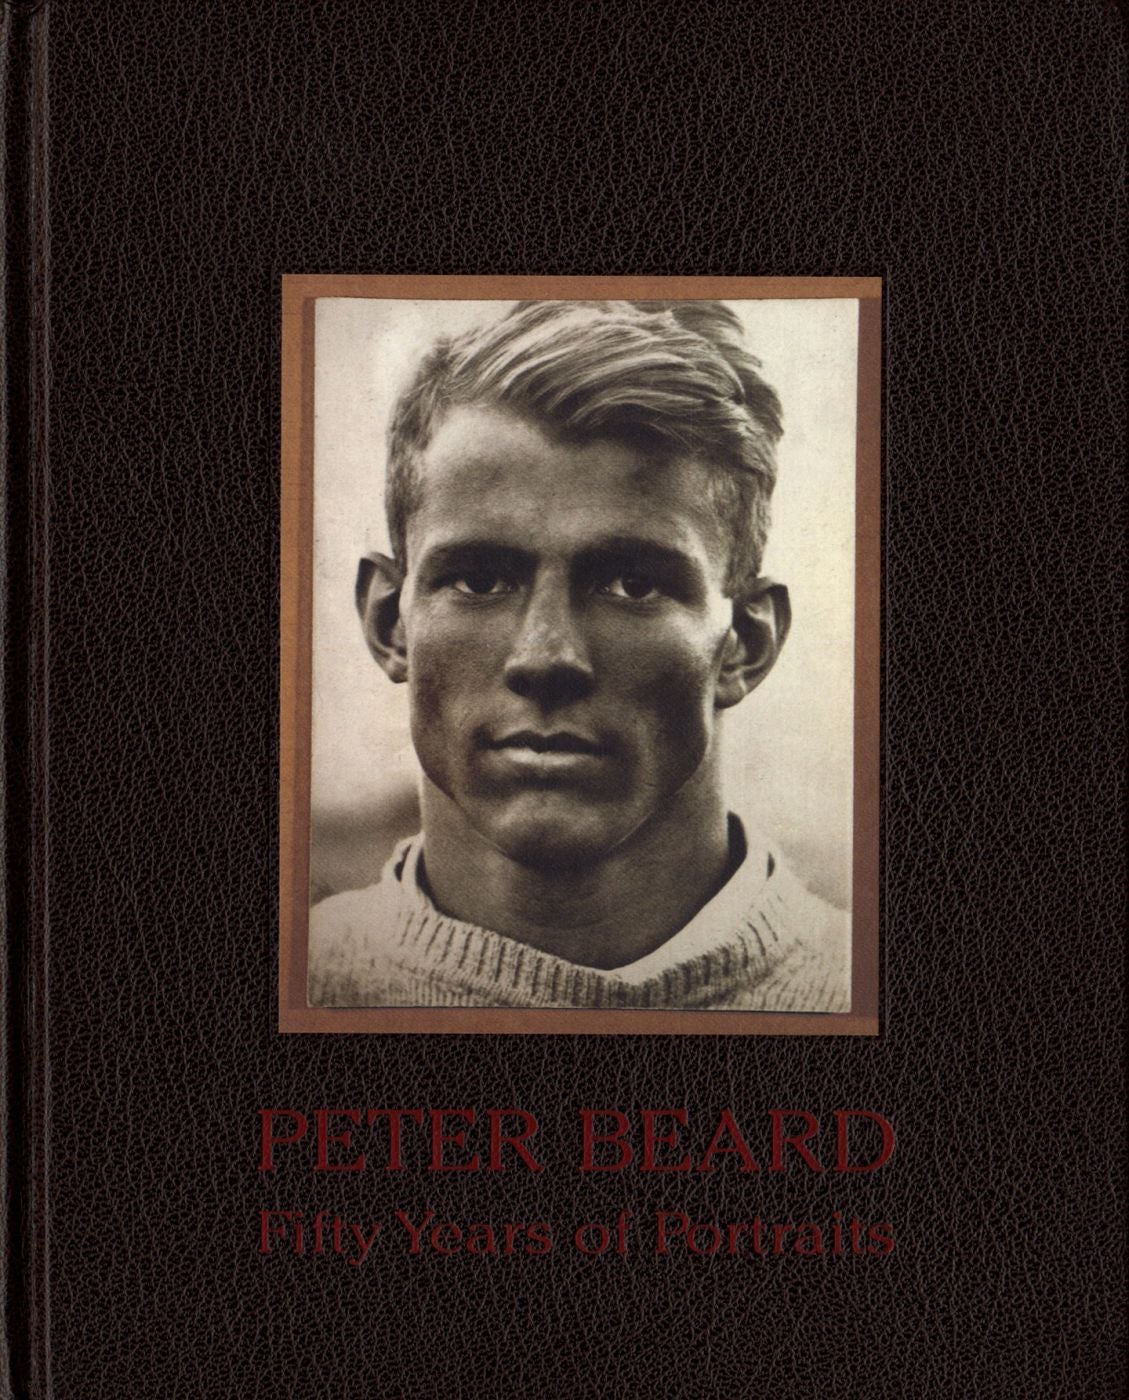 Peter Beard: Fifty Years of Portraits [SIGNED ASSOCIATION COPY] (Includes additional ephemera)